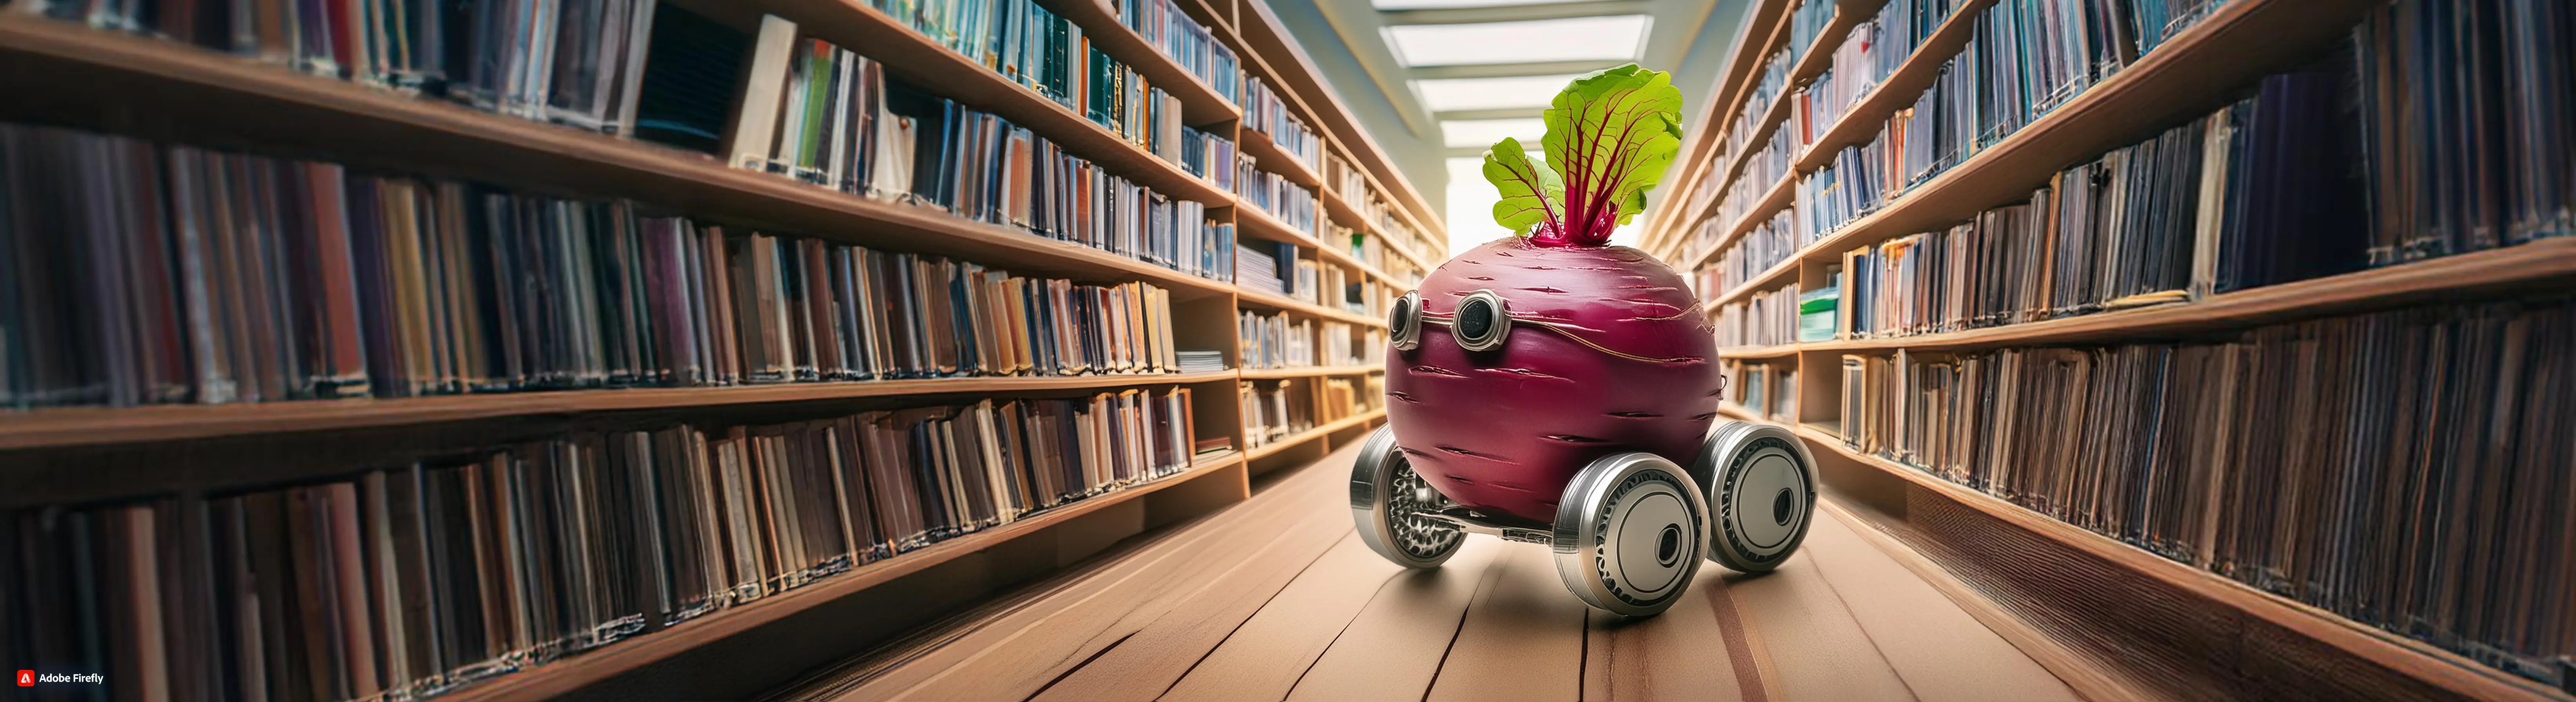 Beet with green leaves and robotic wheels in the middle of a library with shelves in front and behind it that are filled with periodicals. The robotic beet is looking toward the shelf on the left. Generated with AI via Adobe Firefly.